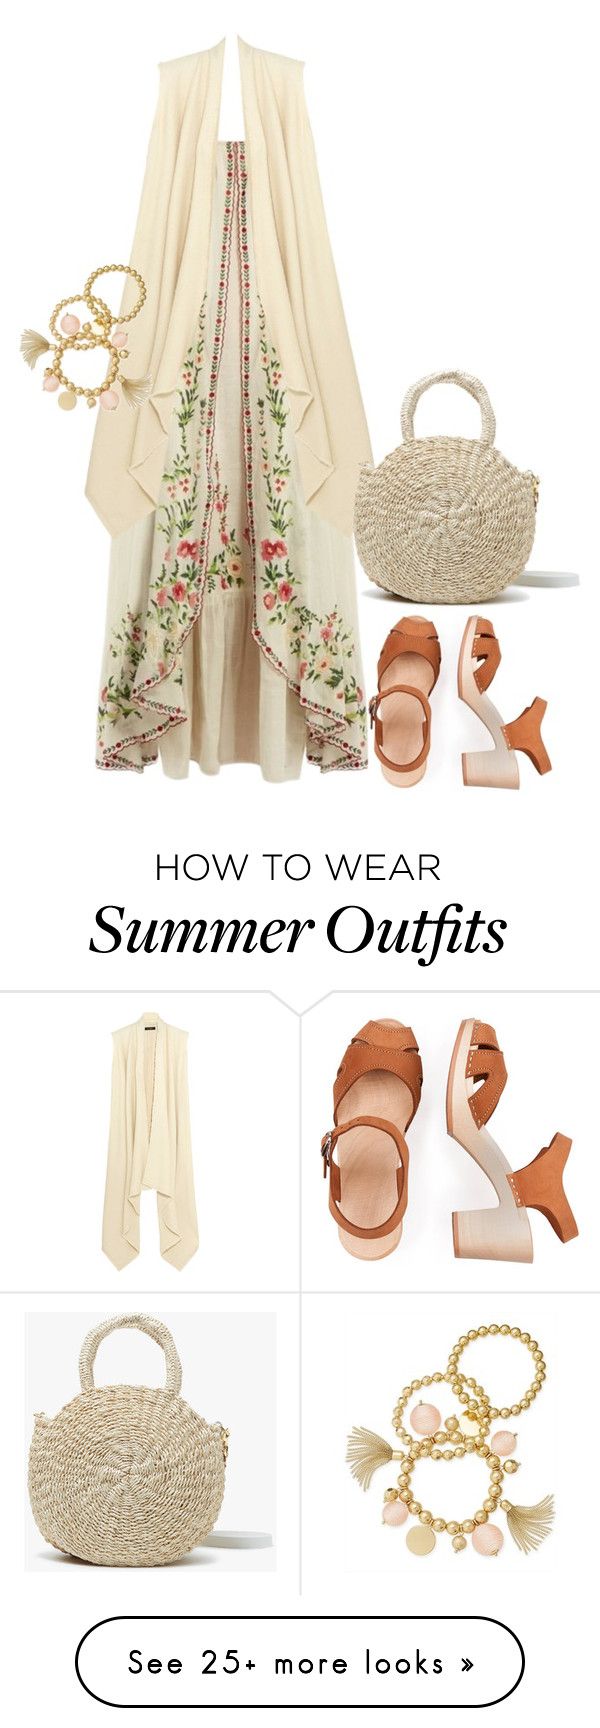 Summer Outfits : "THROW-AND-GO-DRESS" by byasha on Polyvore featuring Isabel Marant, Clare V. and... Fashion Inspire | Fashion inspiration Magazine, beauty ideaas, trends and more